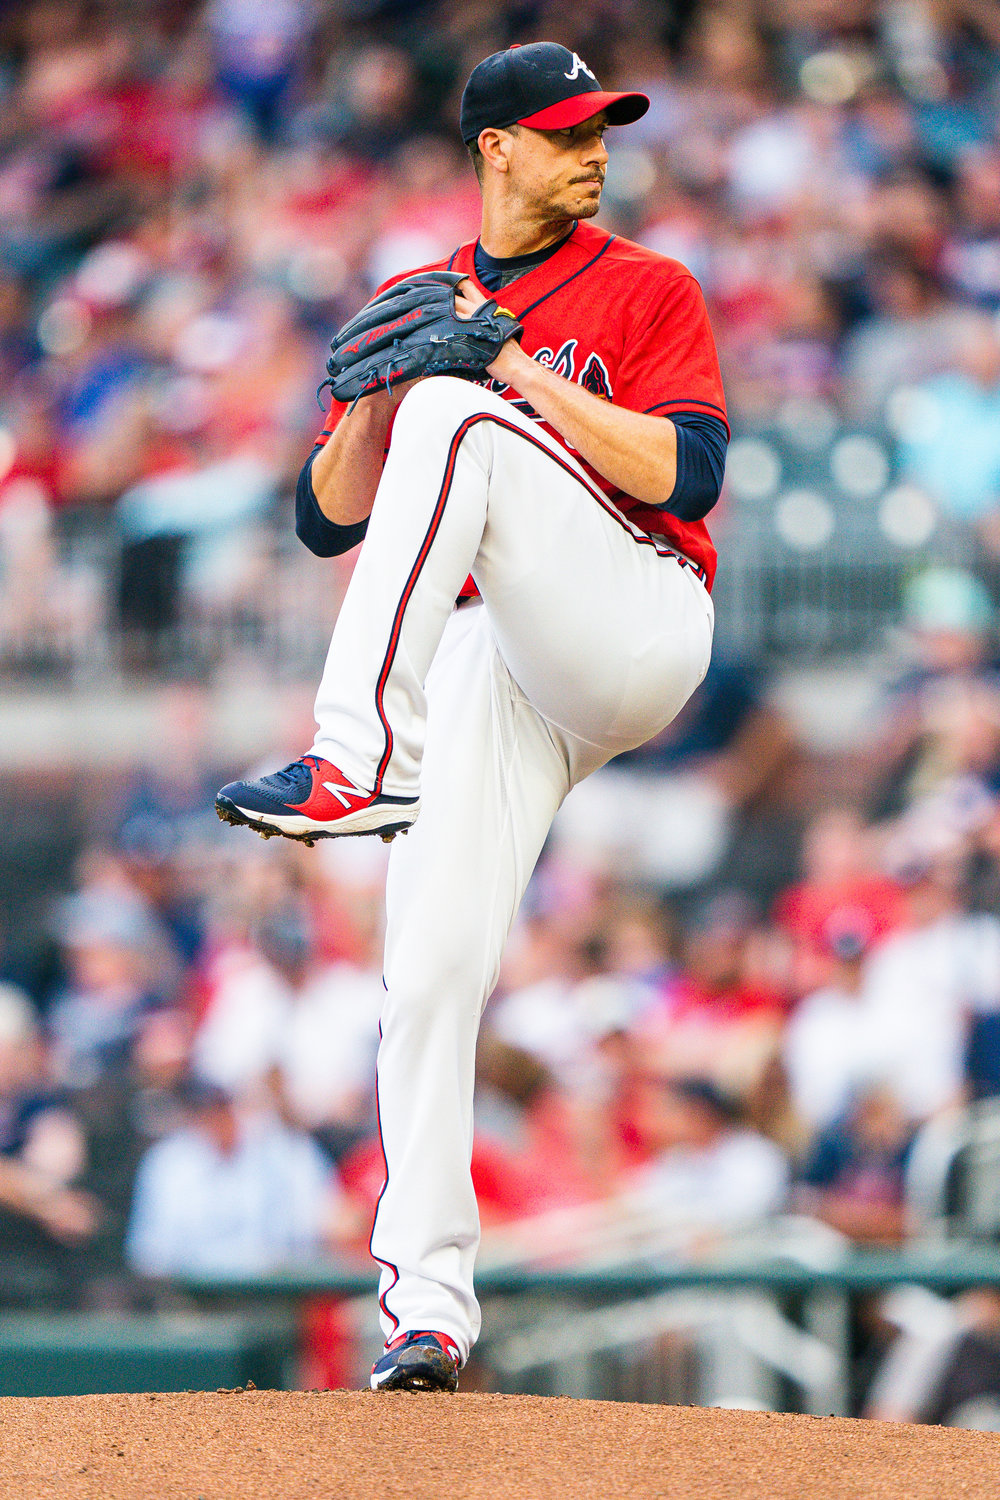 Charlie Morton #50 of the Atlanta Braves during game 1 against the Washington Nationals at Truist Park on Friday, July 8, 2022.